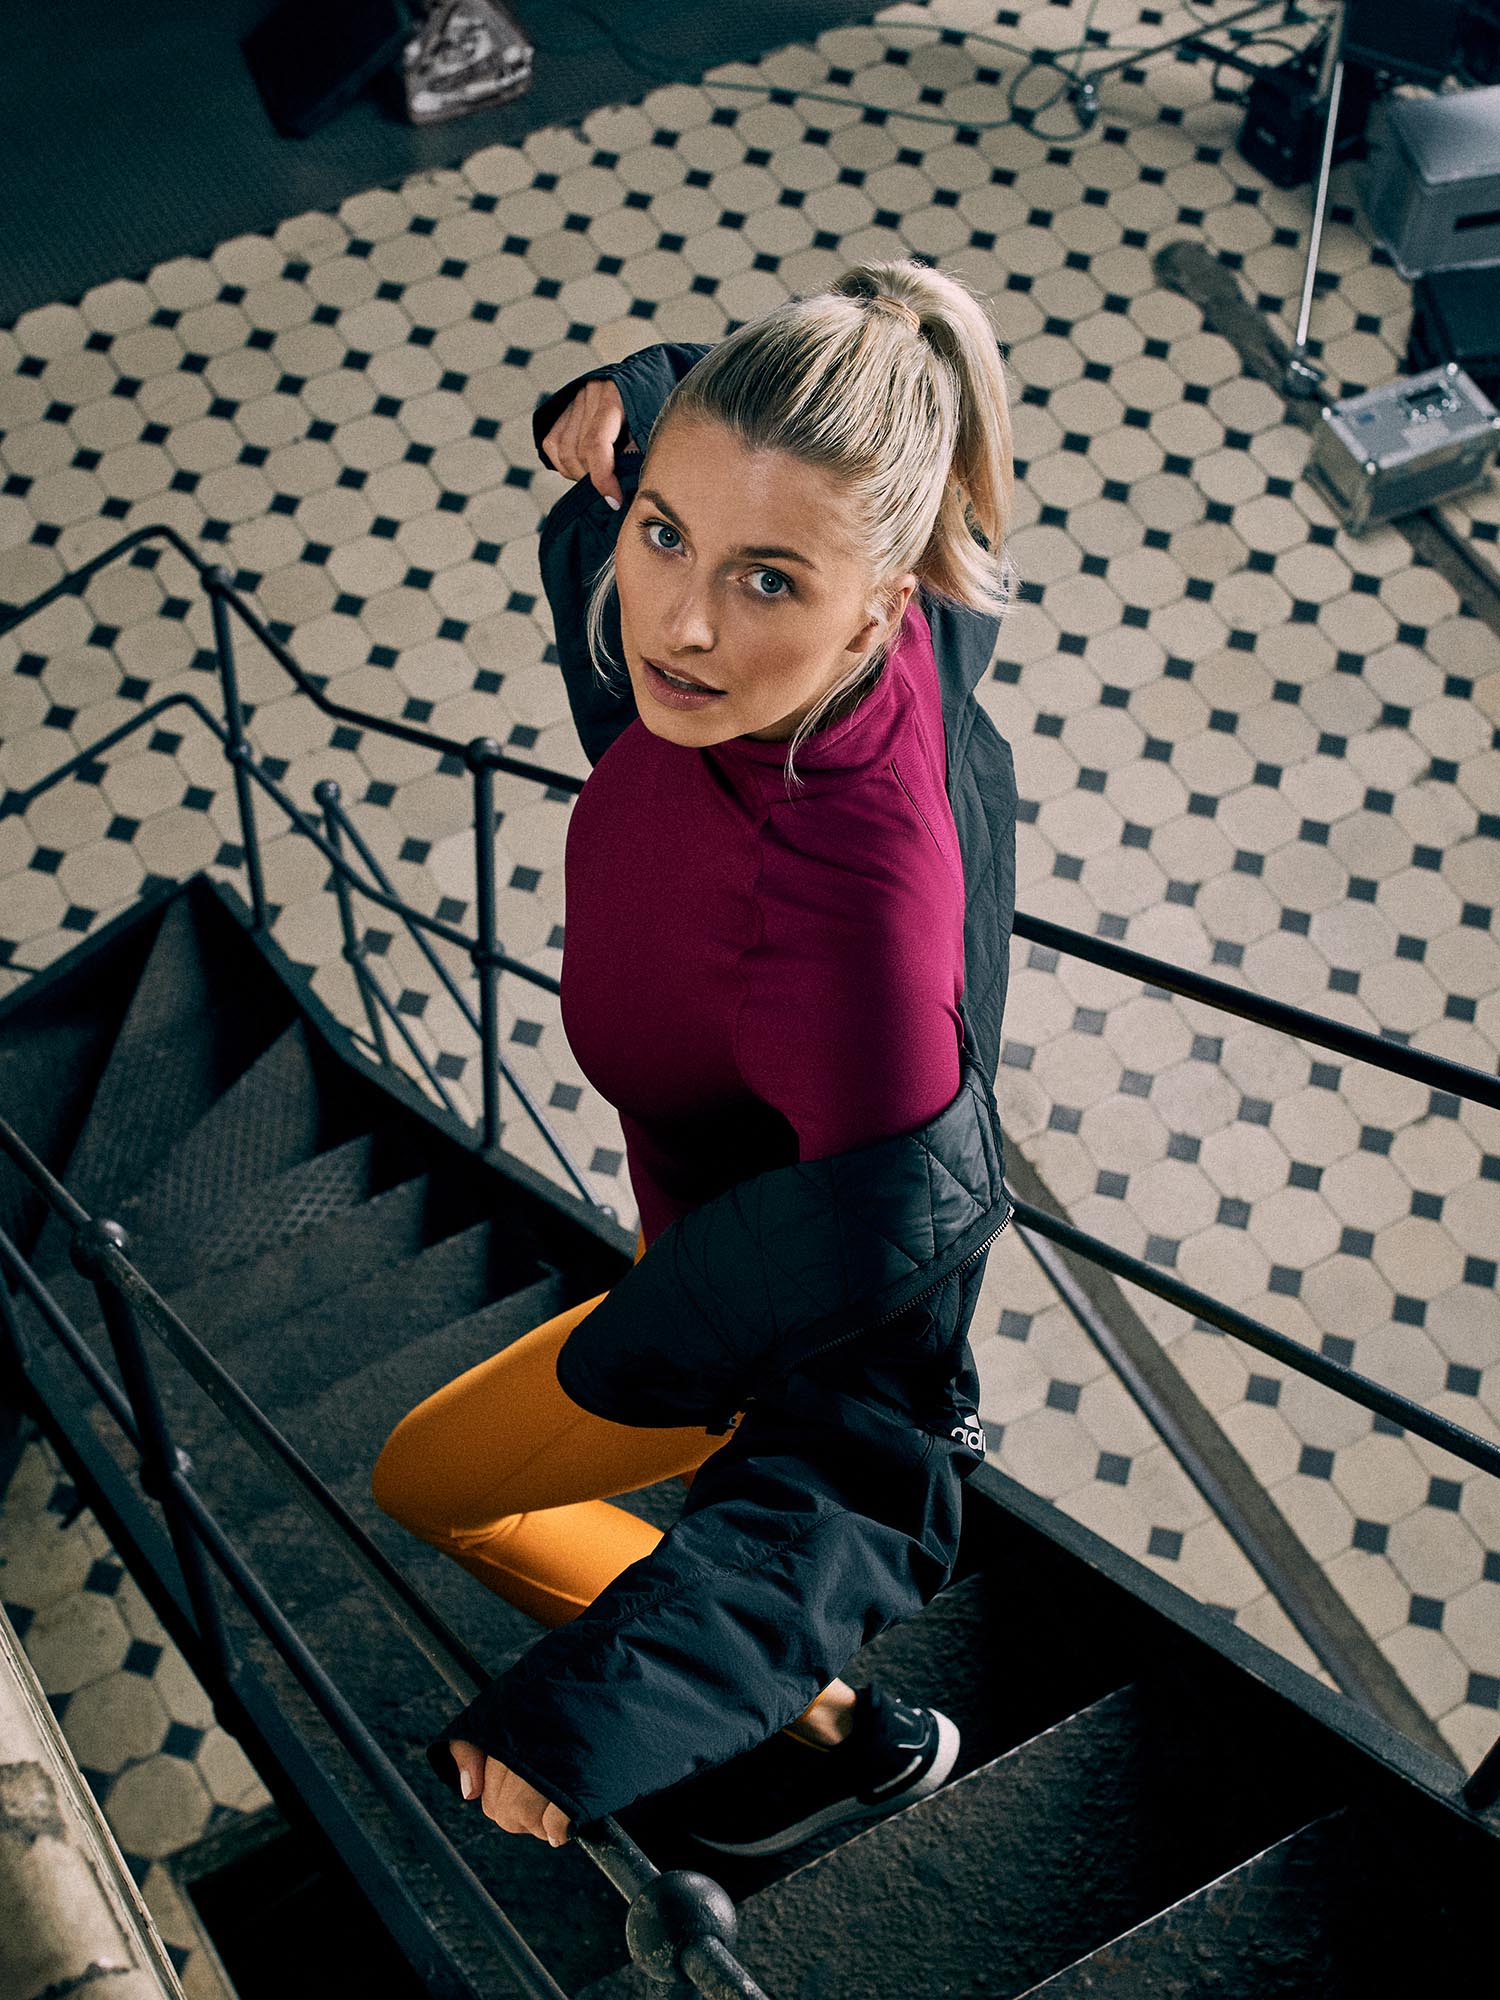 Lena Gercke adidas about you 04